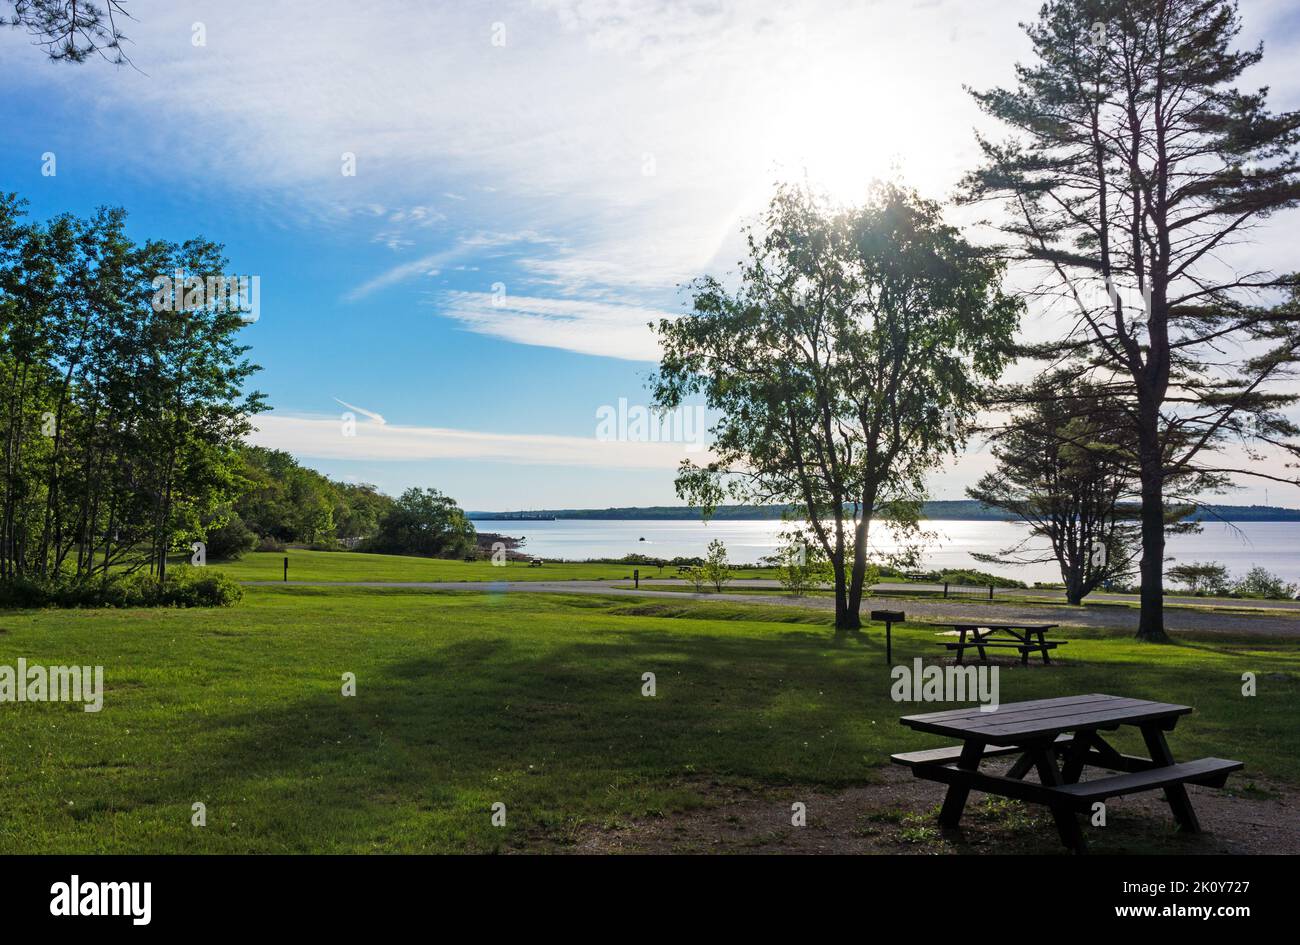 Park setting near the ocean in the early morning with picnic tables, trees and mowed grass on the coast of Maine. Stock Photo